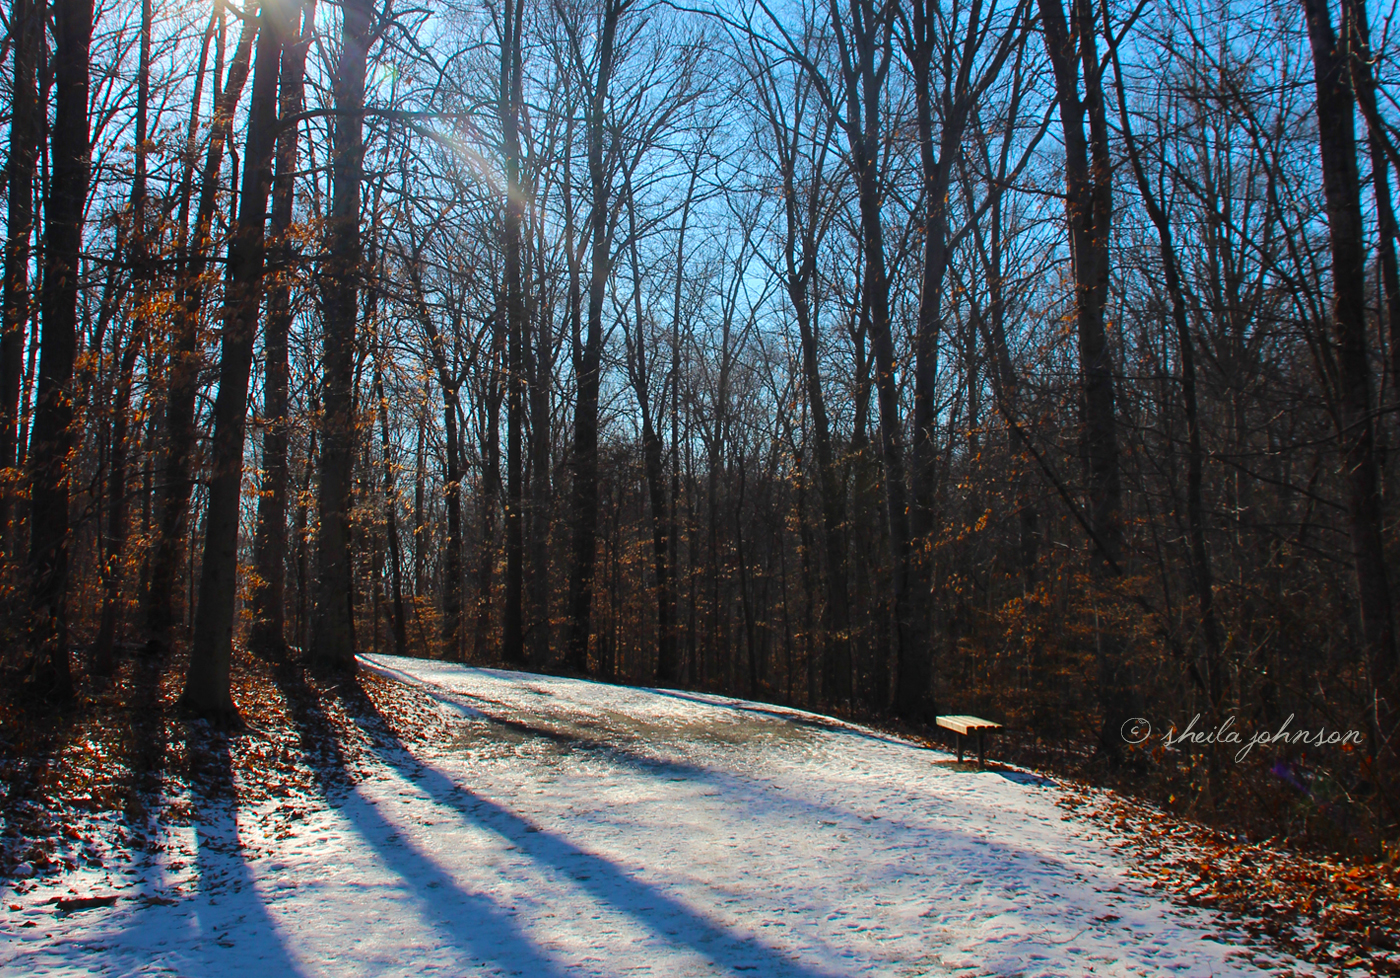 Trees Cast Long Shadows At The Ma And Pa Trail In Bel Air, Maryland, Under The Winter Sunlight.